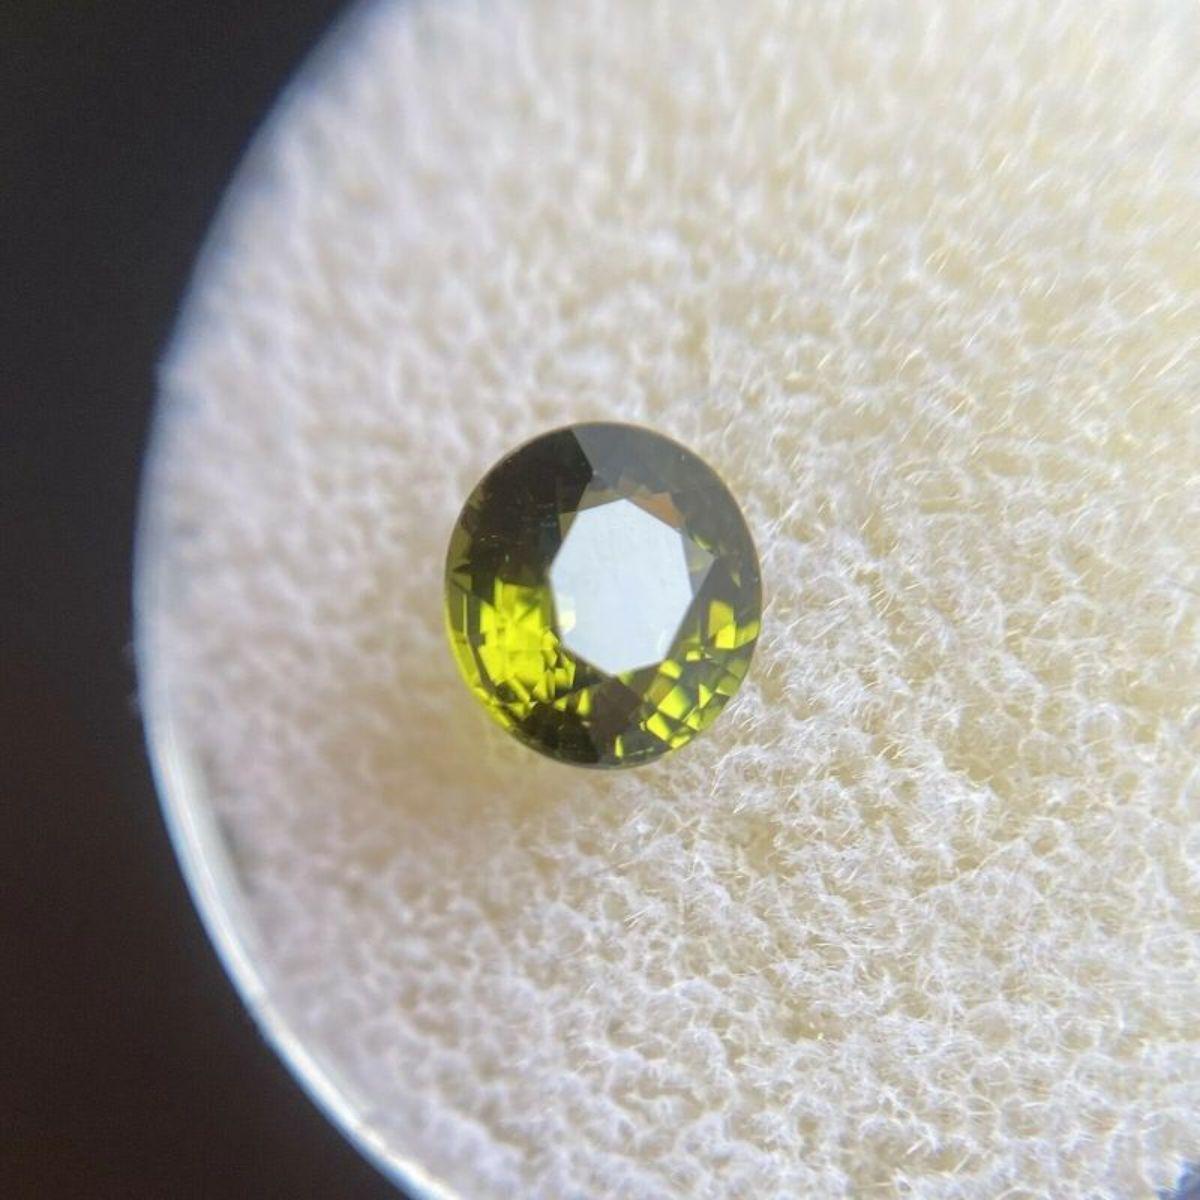 Deep Green Tourmaline 1.08ct Oval Cut Loose Gemstone 6.5 x 6.1mm

Natural Deep Green Tourmaline Gemstone. 
1.08 Carat with a beautiful deep green colour and excellent clarity. Very clean stone. Also has an excellent oval cut with good proportions